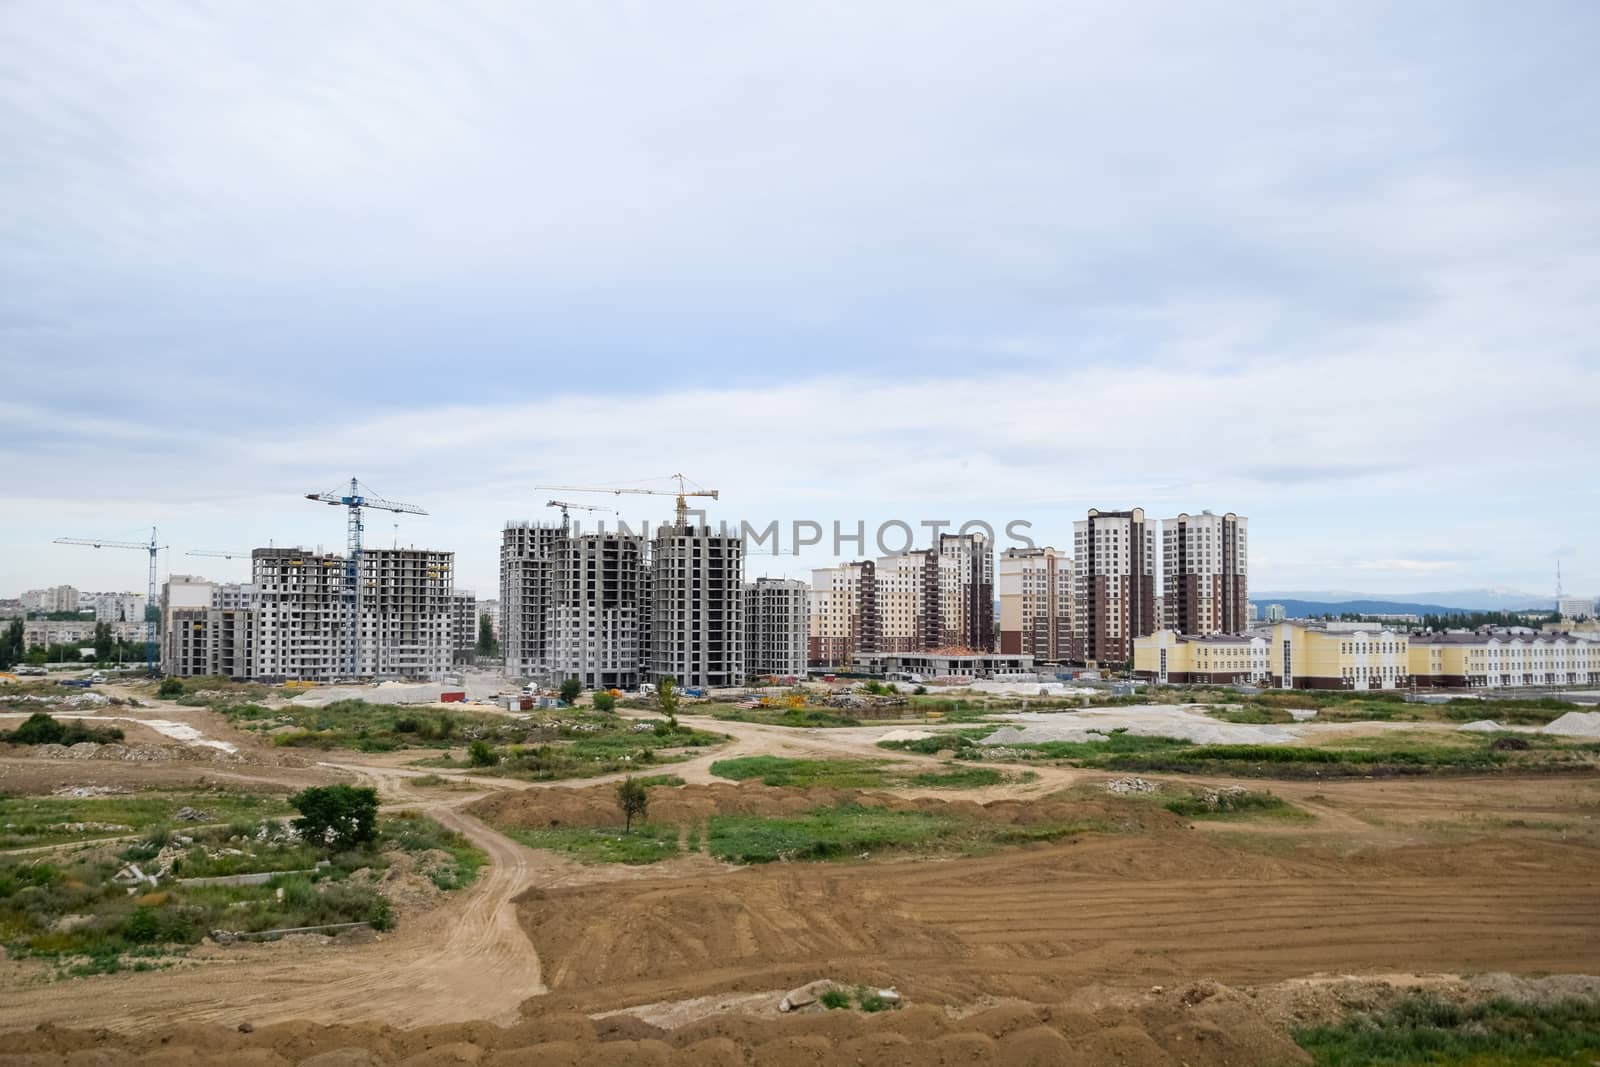 The construction of multi-storey residential buildings. Tower cranes at a construction site.